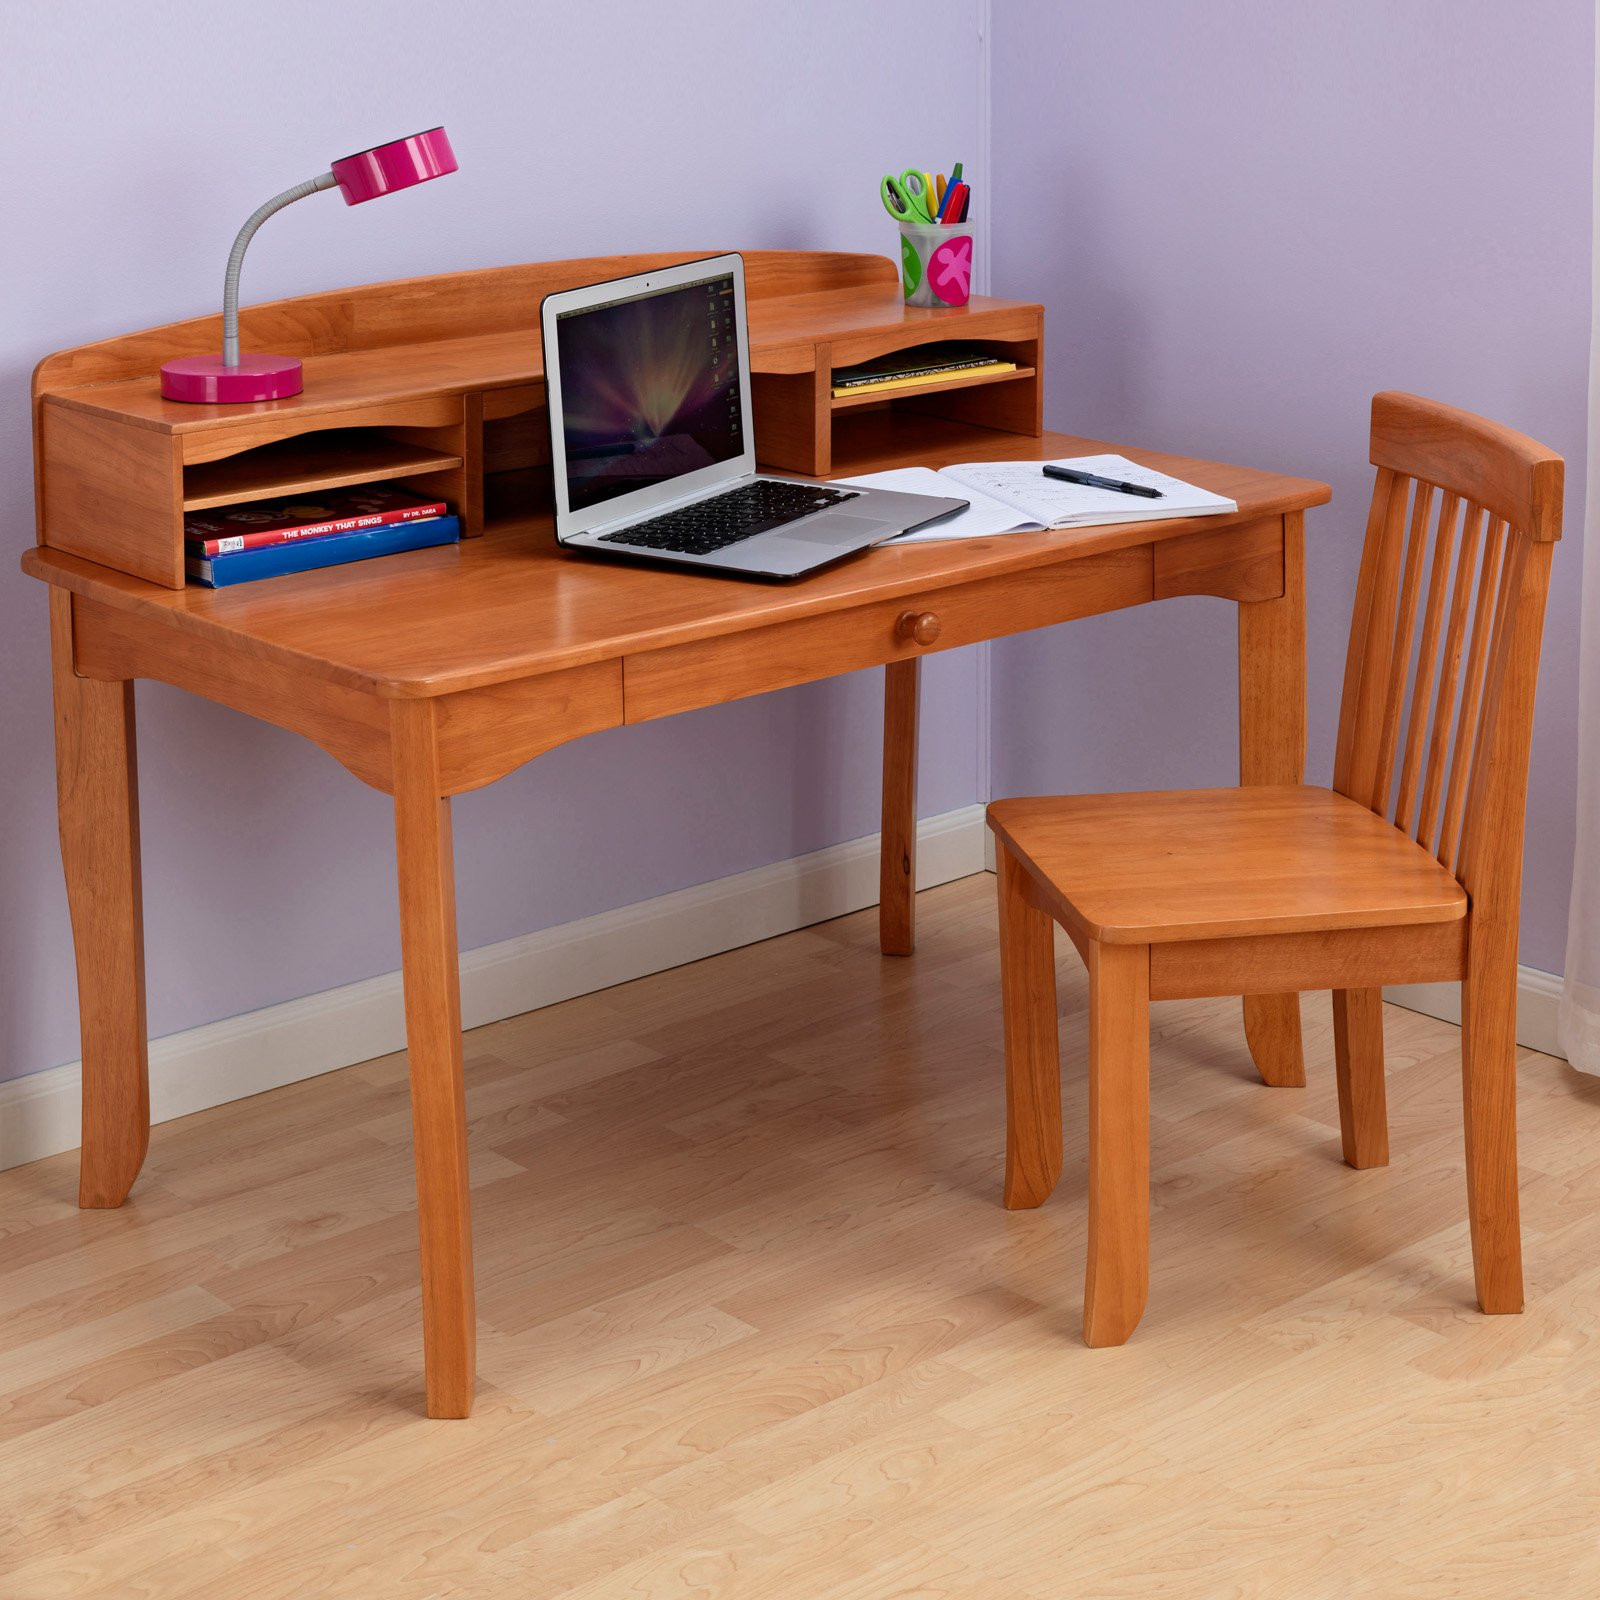 Kids Desk And Chair
 Kid Desk With Chair Design